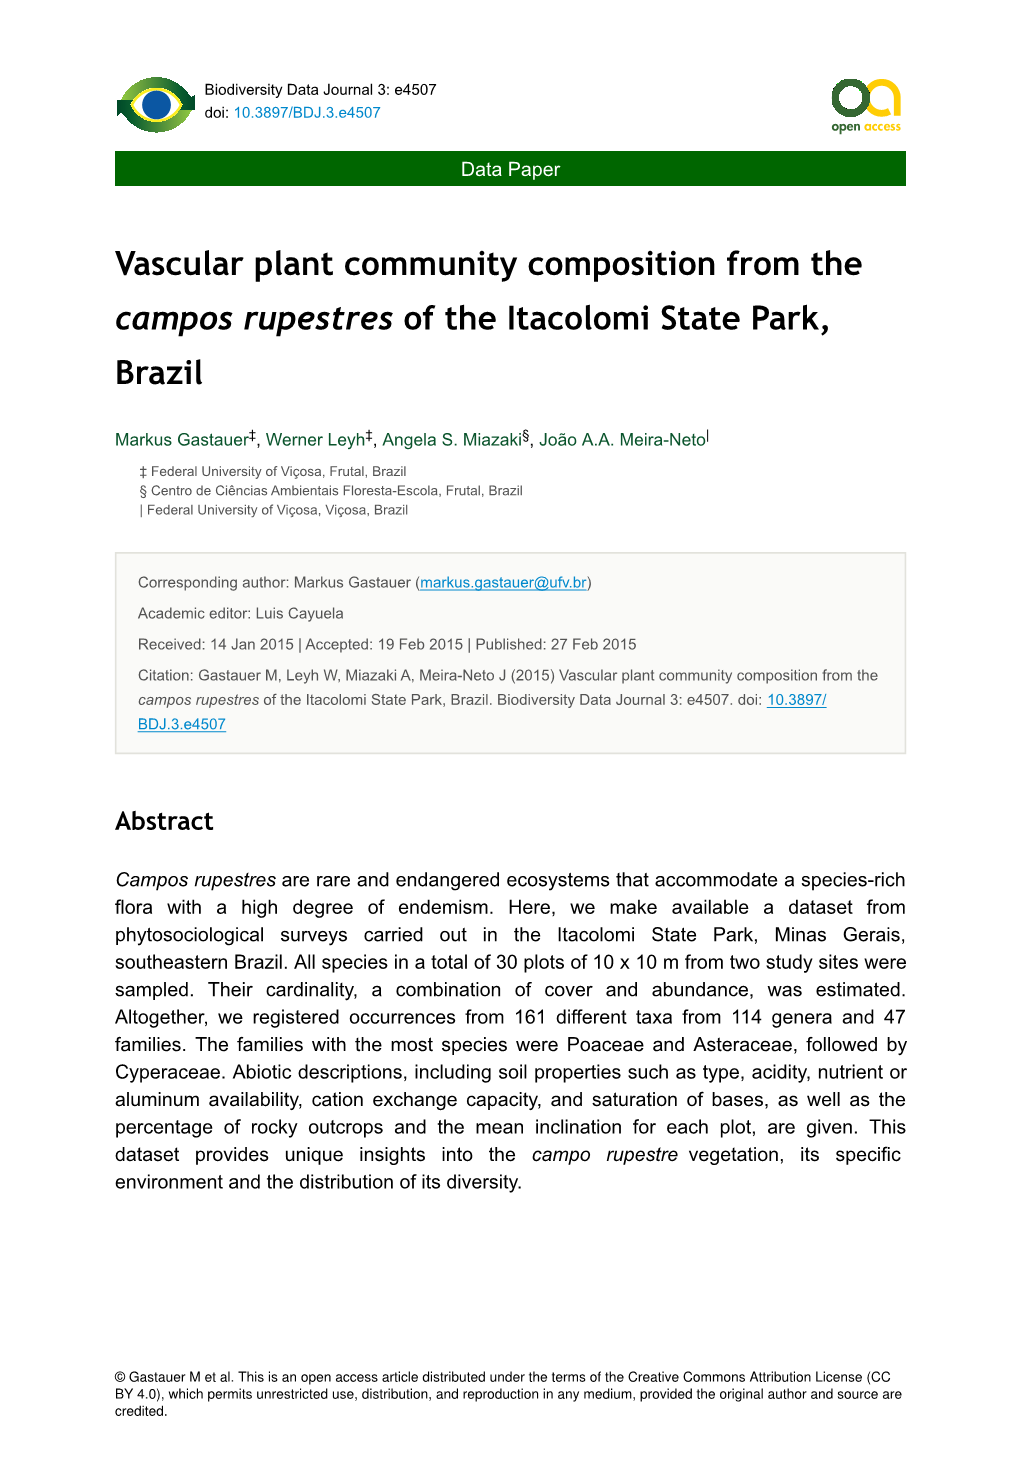 Vascular Plant Community Composition from the Campos Rupestres of the Itacolomi State Park, Brazil